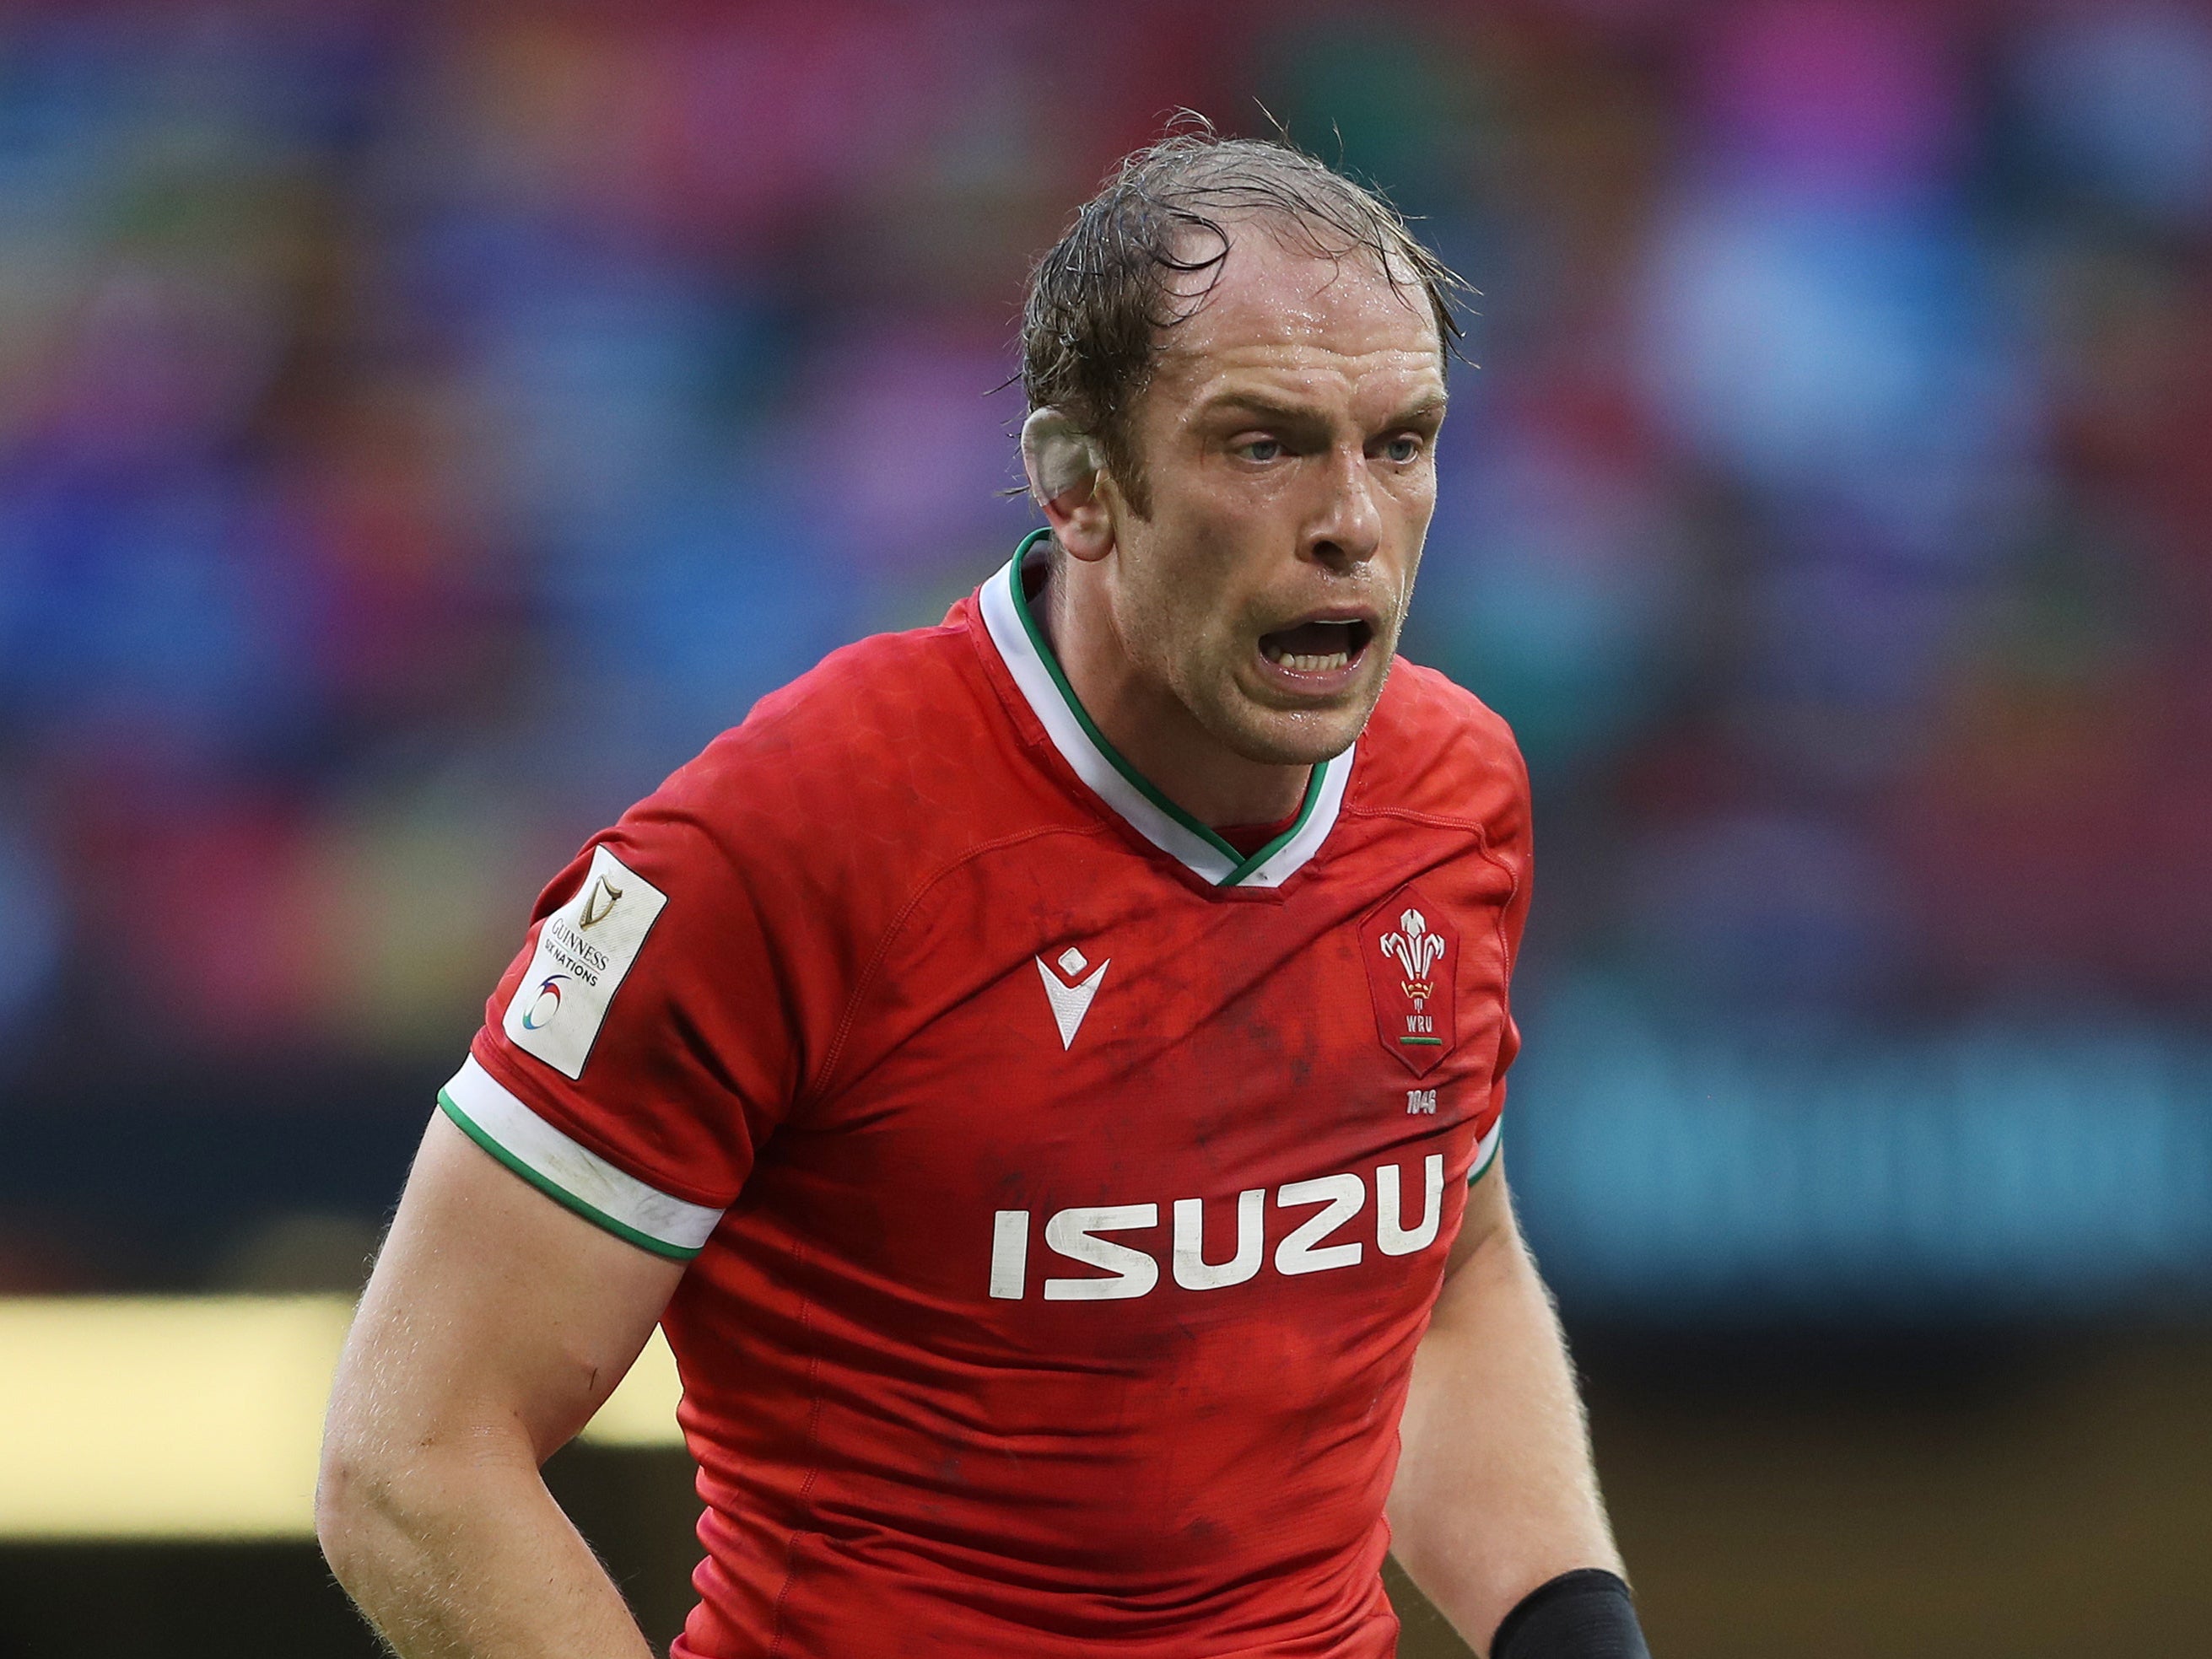 Alun Wyn Jones will link up with Wales to continue his recovery from a shoulder injury